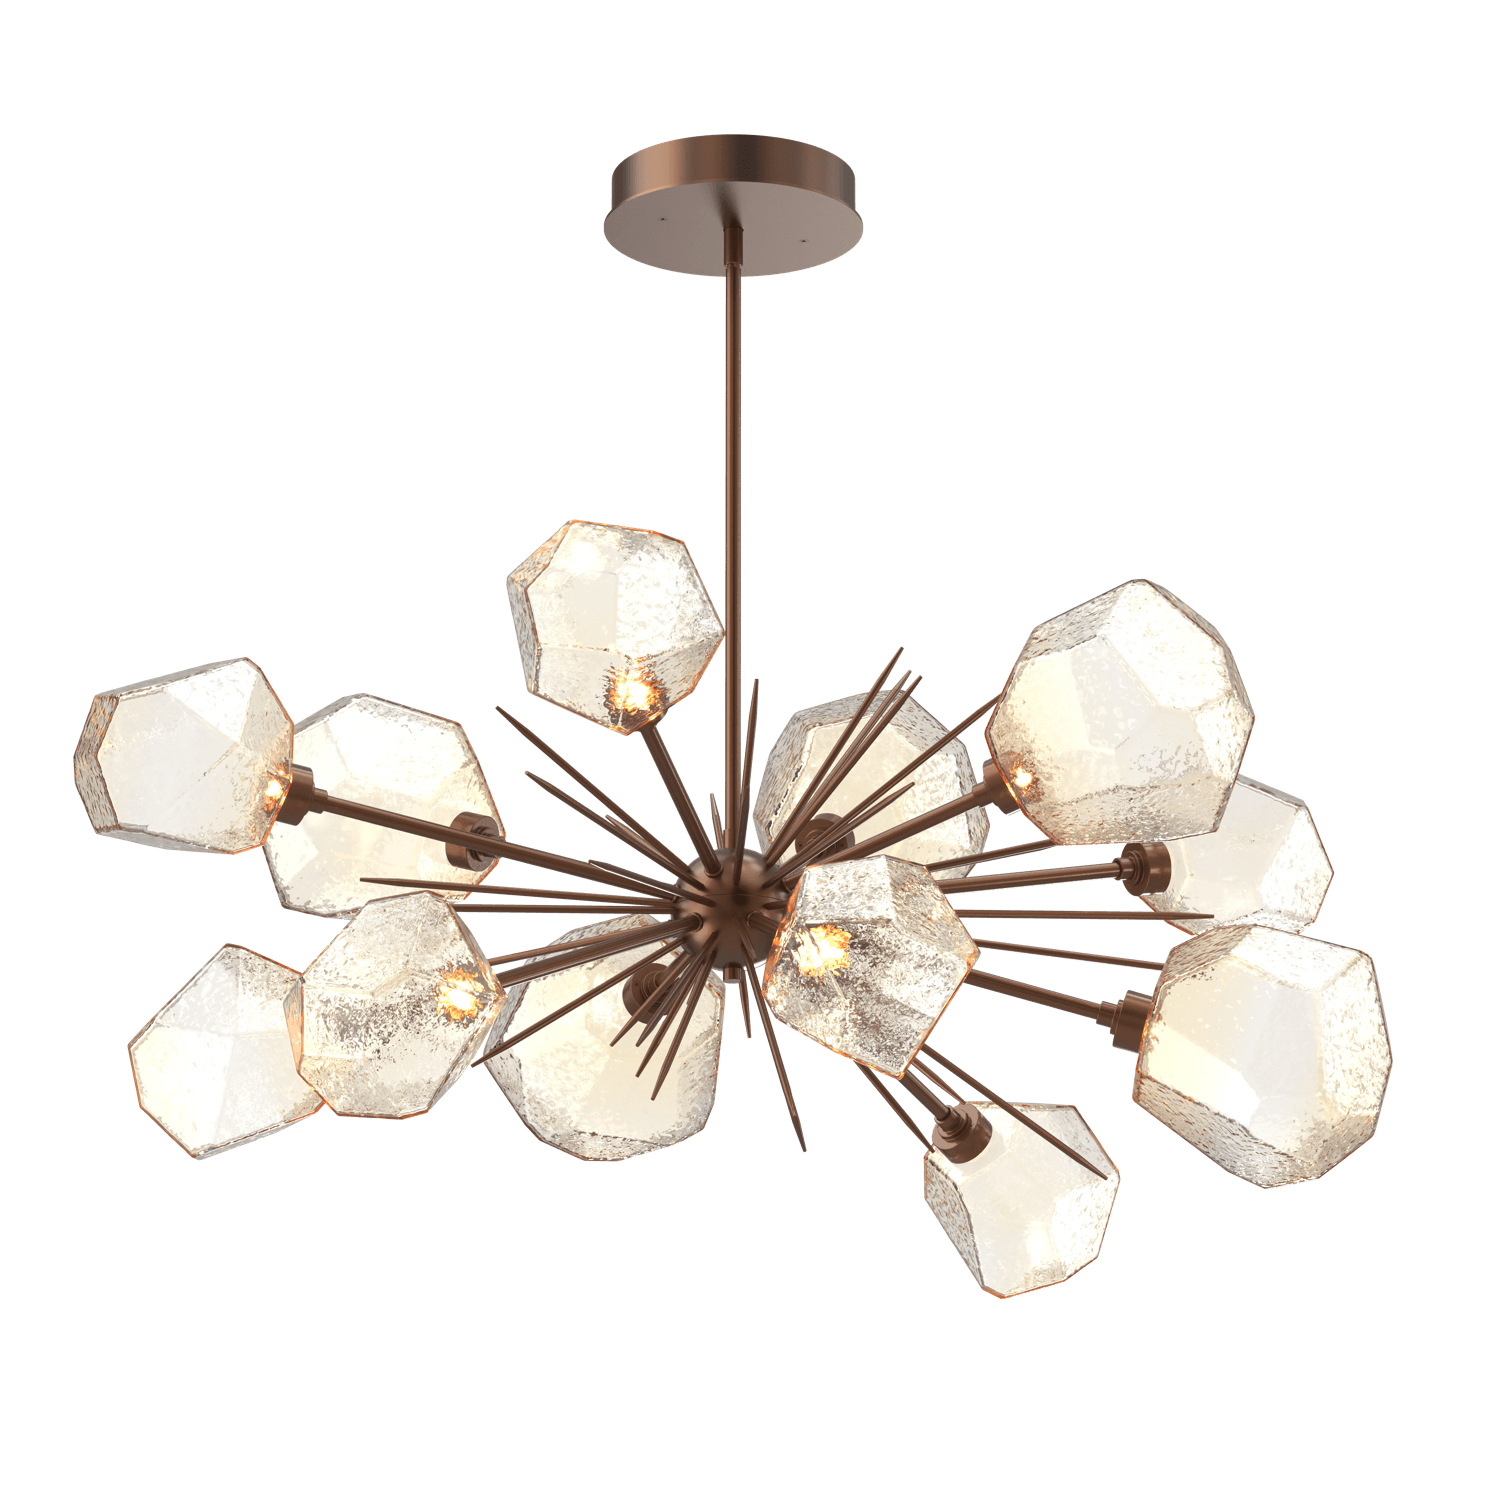 PLB0039-0D-BB-A-Hammerton-Studio-Gem-43-inch-oval-starburst-chandelier-with-burnished-bronze-finish-and-amber-blown-glass-shades-and-LED-lamping